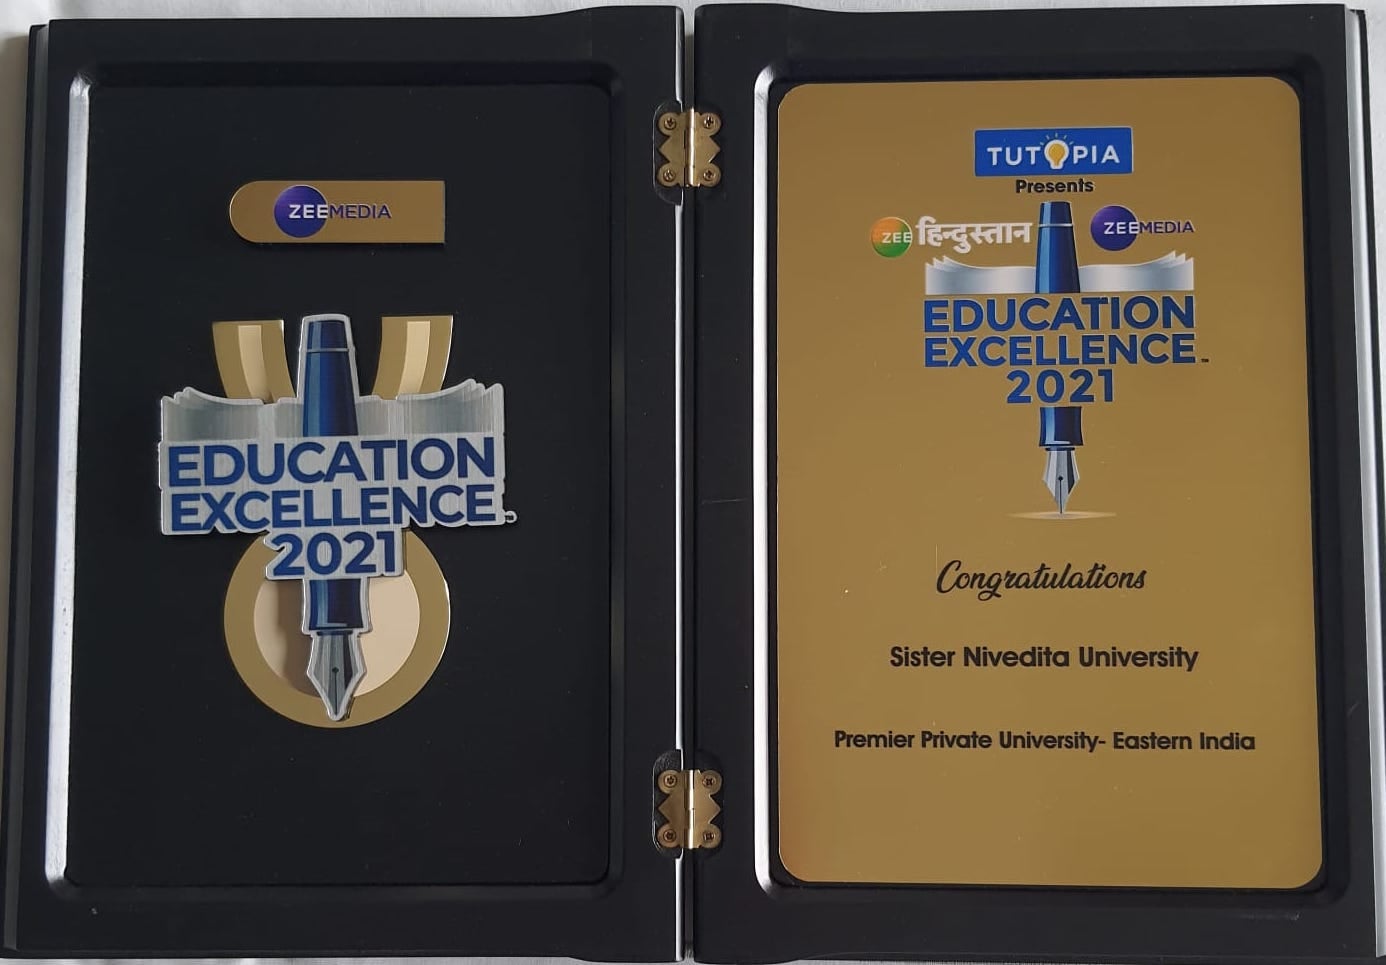 EDUCATION EXCELLENCE AWARD to Sister Nivedita University as Premier Private University by Zee Media in association with Tutopia. A PROUD MOMENT INDEED!!